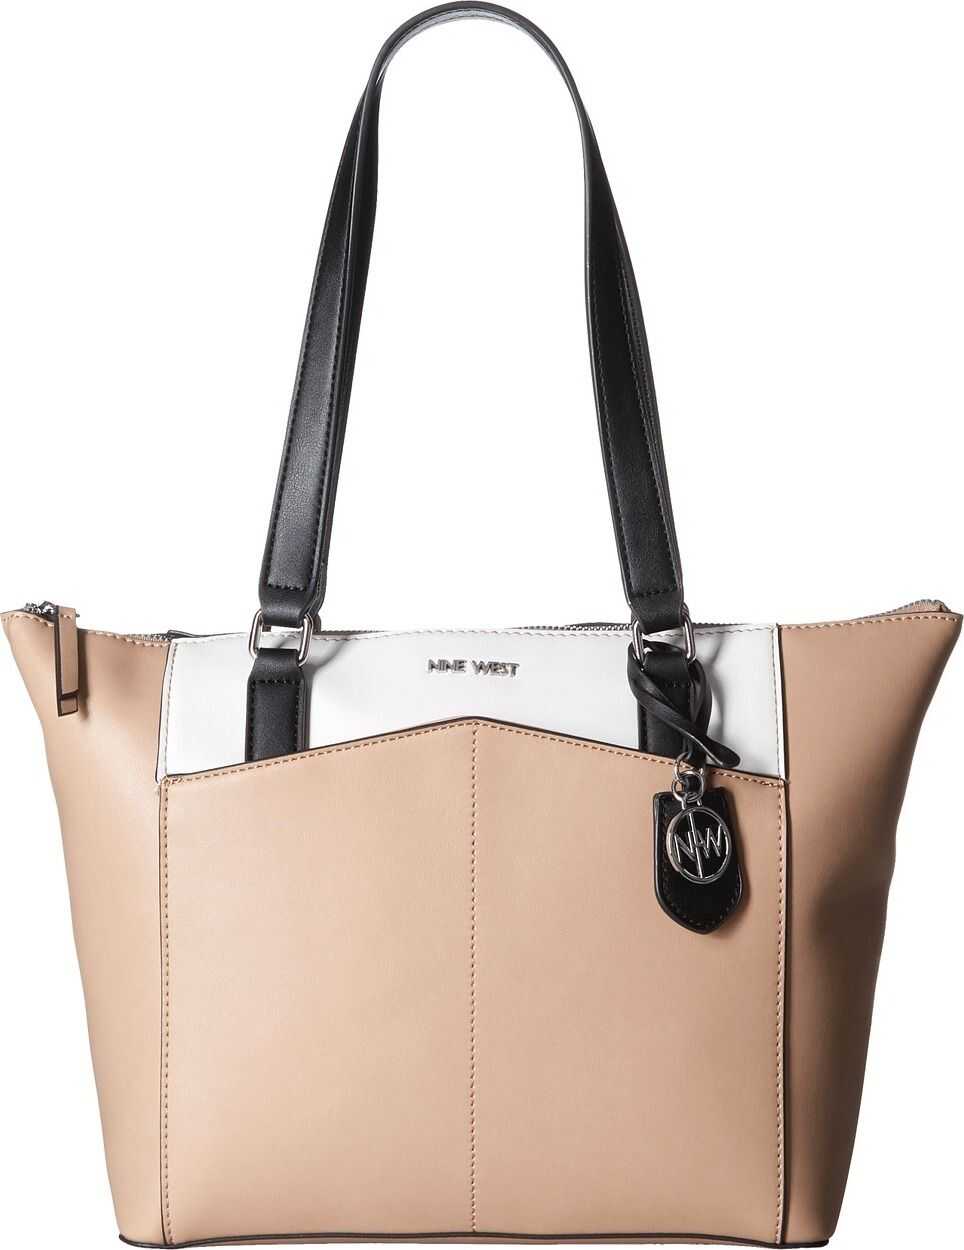 Nine West Atwell Tote Barely Nude Multi